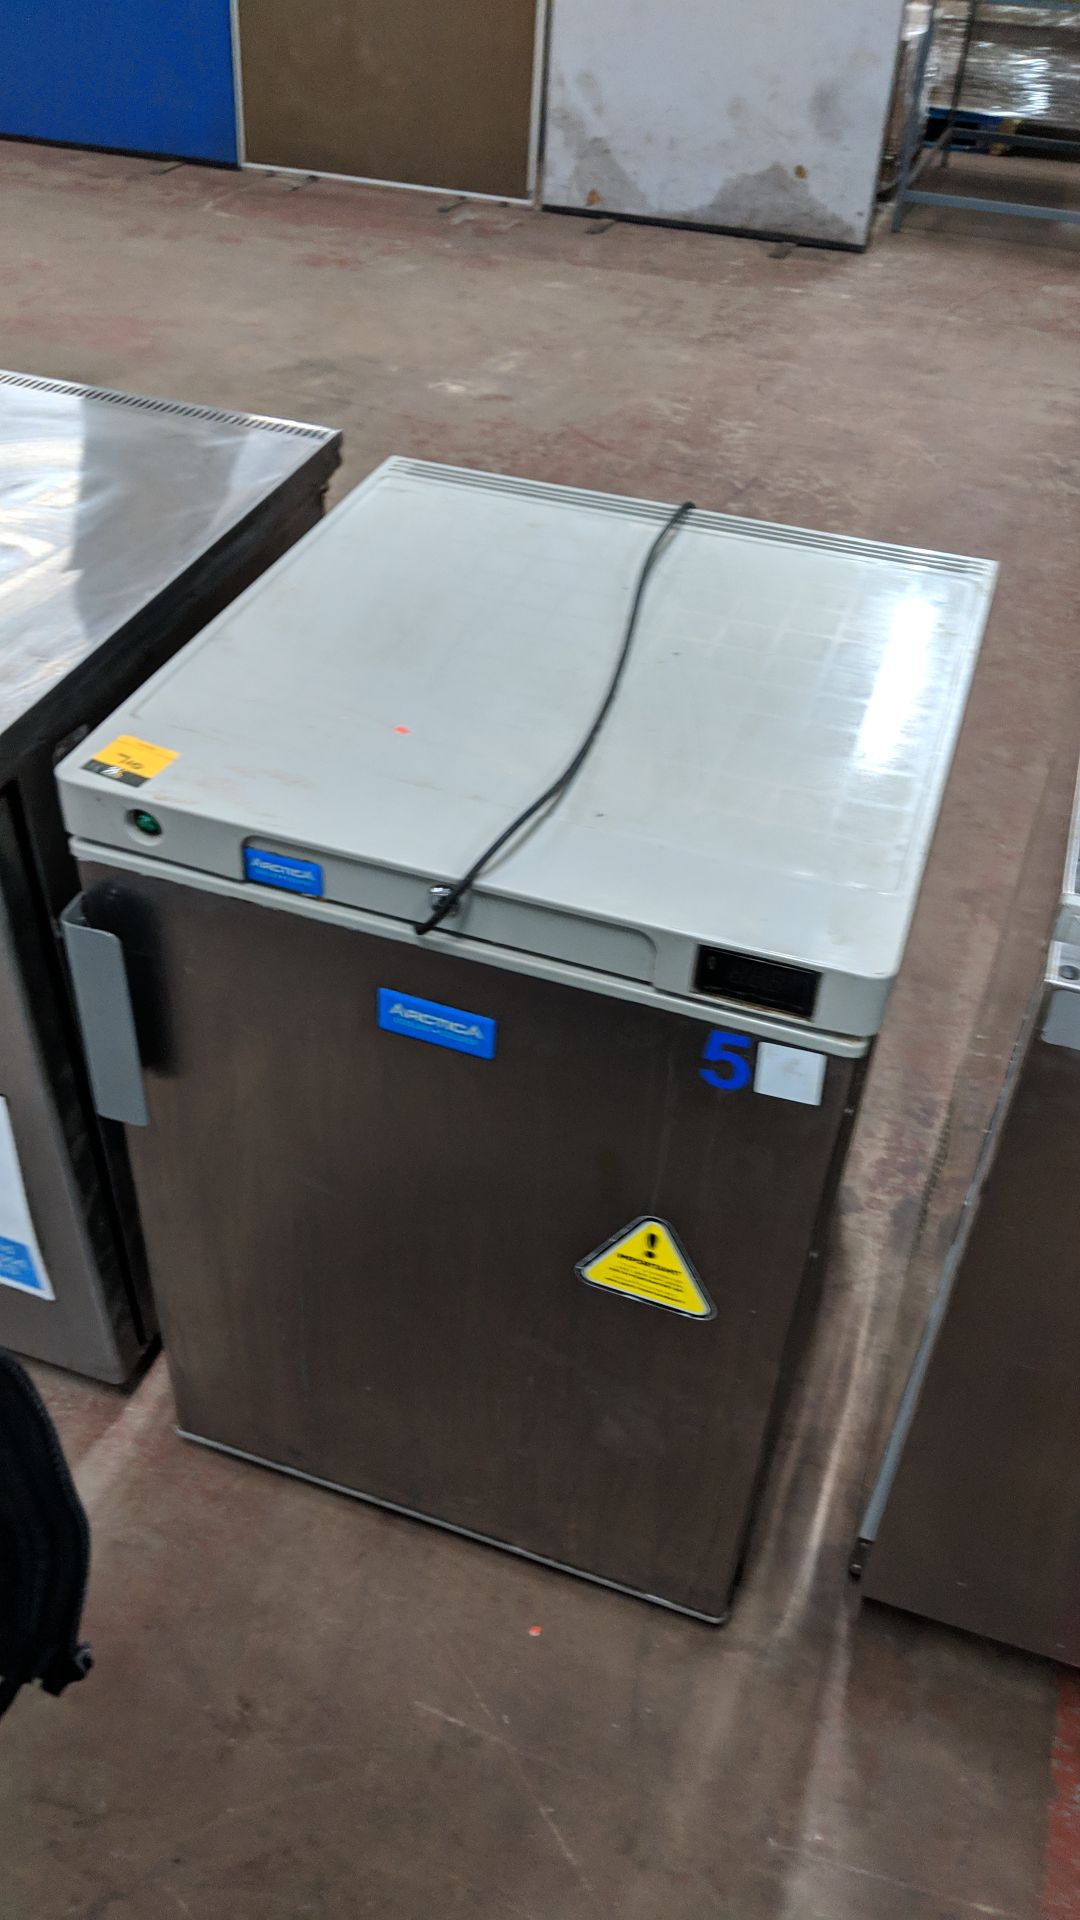 Arctica stainless steel under counter fridge IMPORTANT: Please remember goods successfully bid